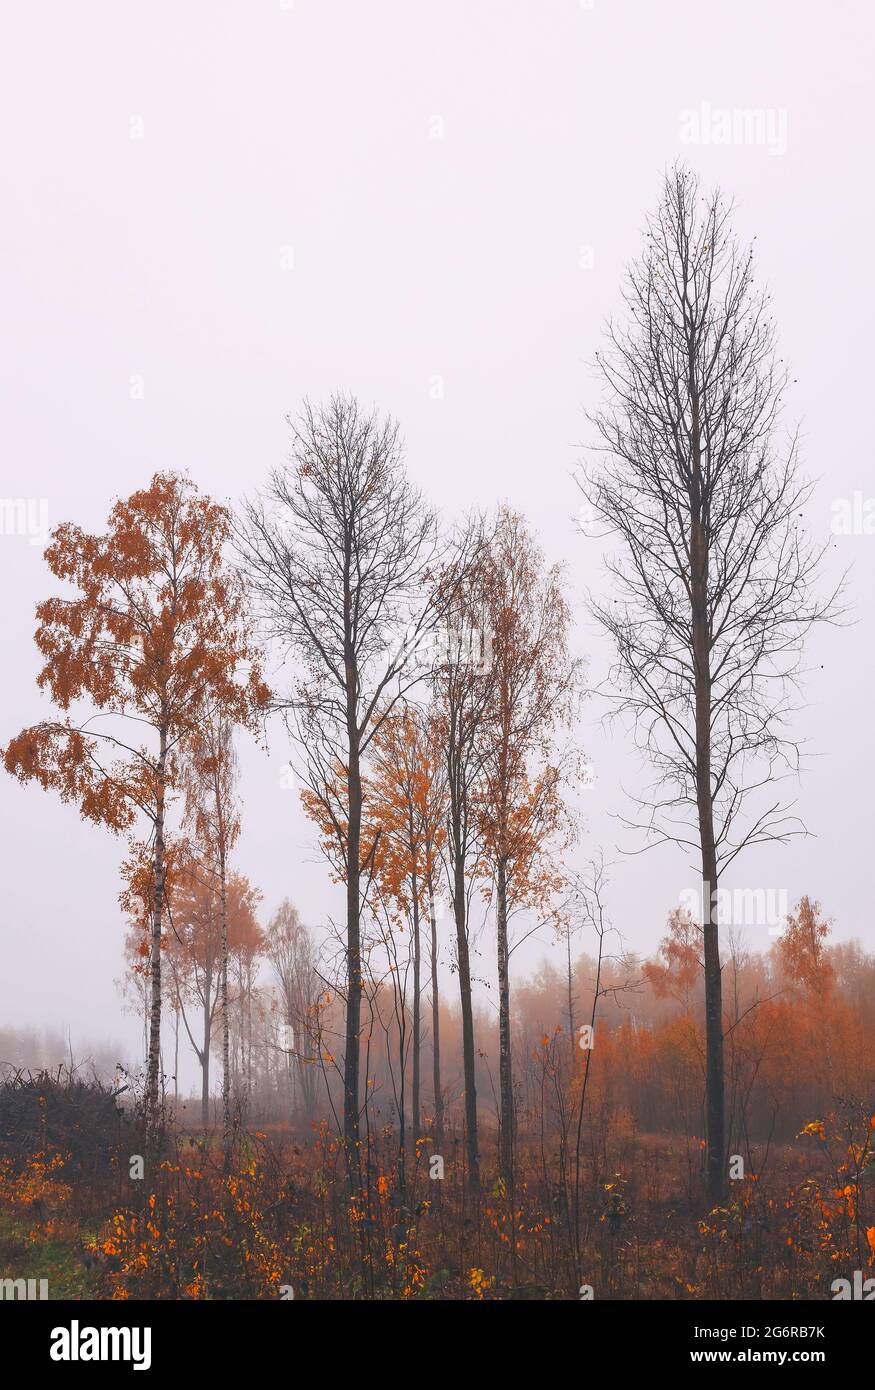 Moody and foggy forrest landscape with tall, skinny beech trees in autumnal colours. Stock Photo